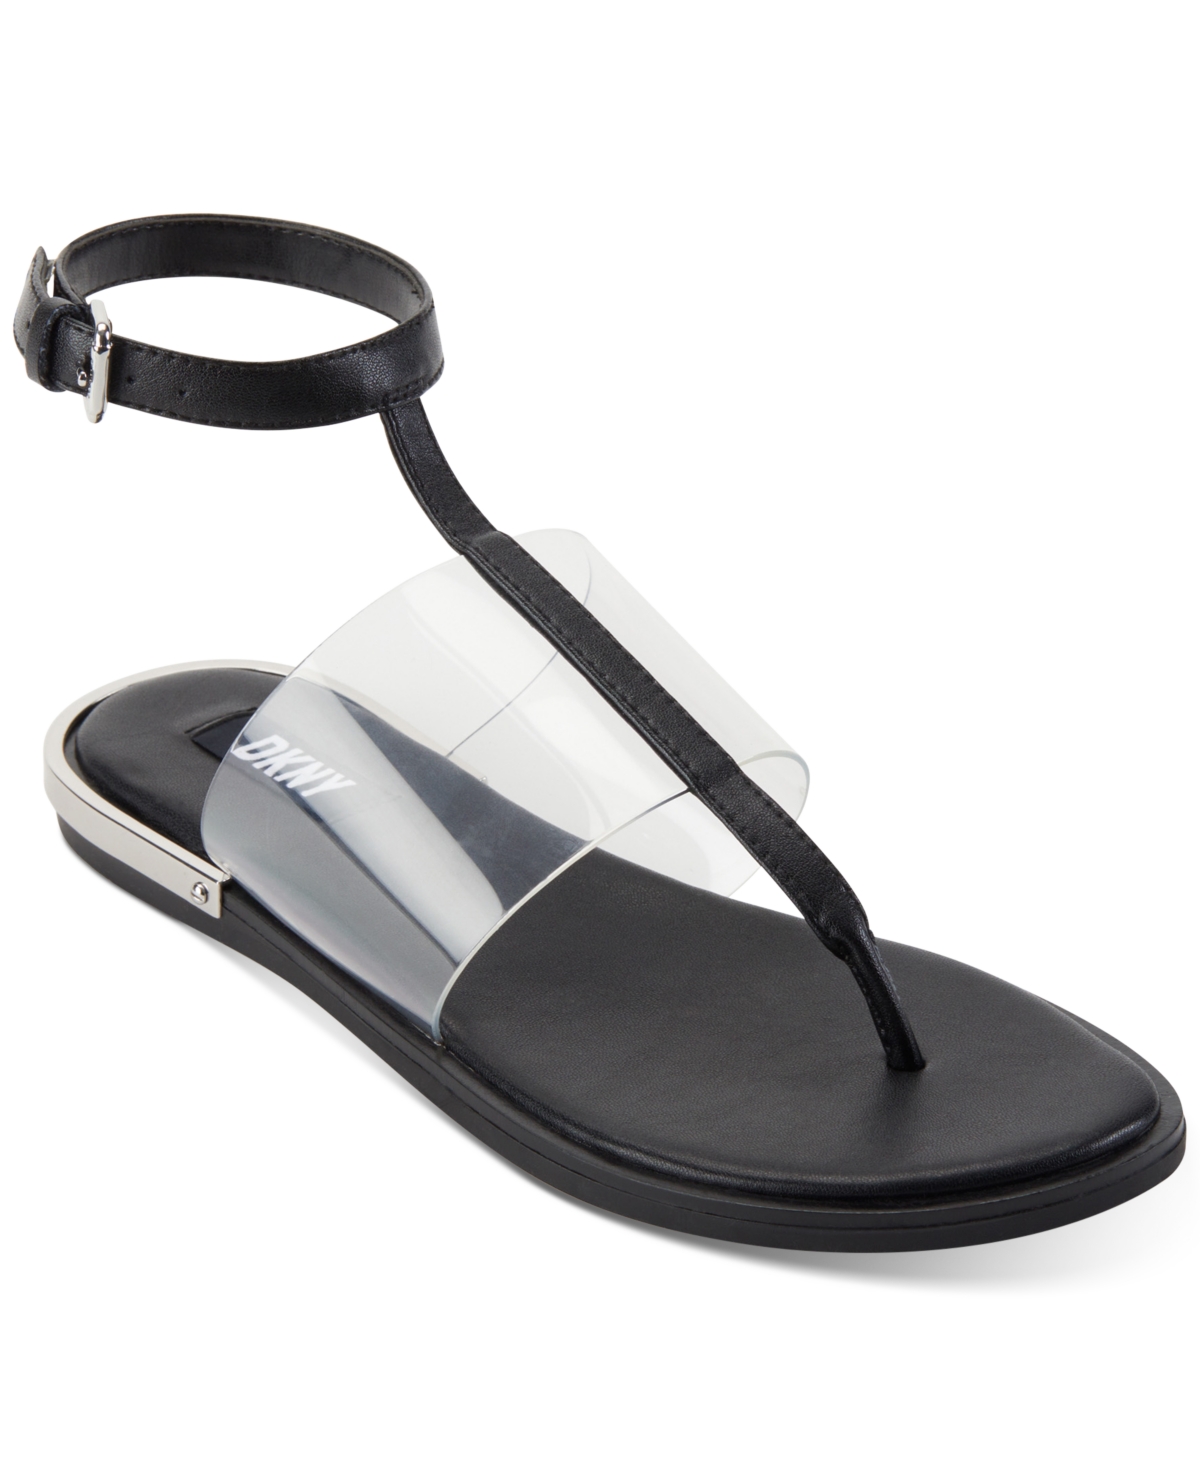 DKNY WOMEN'S AVA ANKLE-STRAP SANDALS